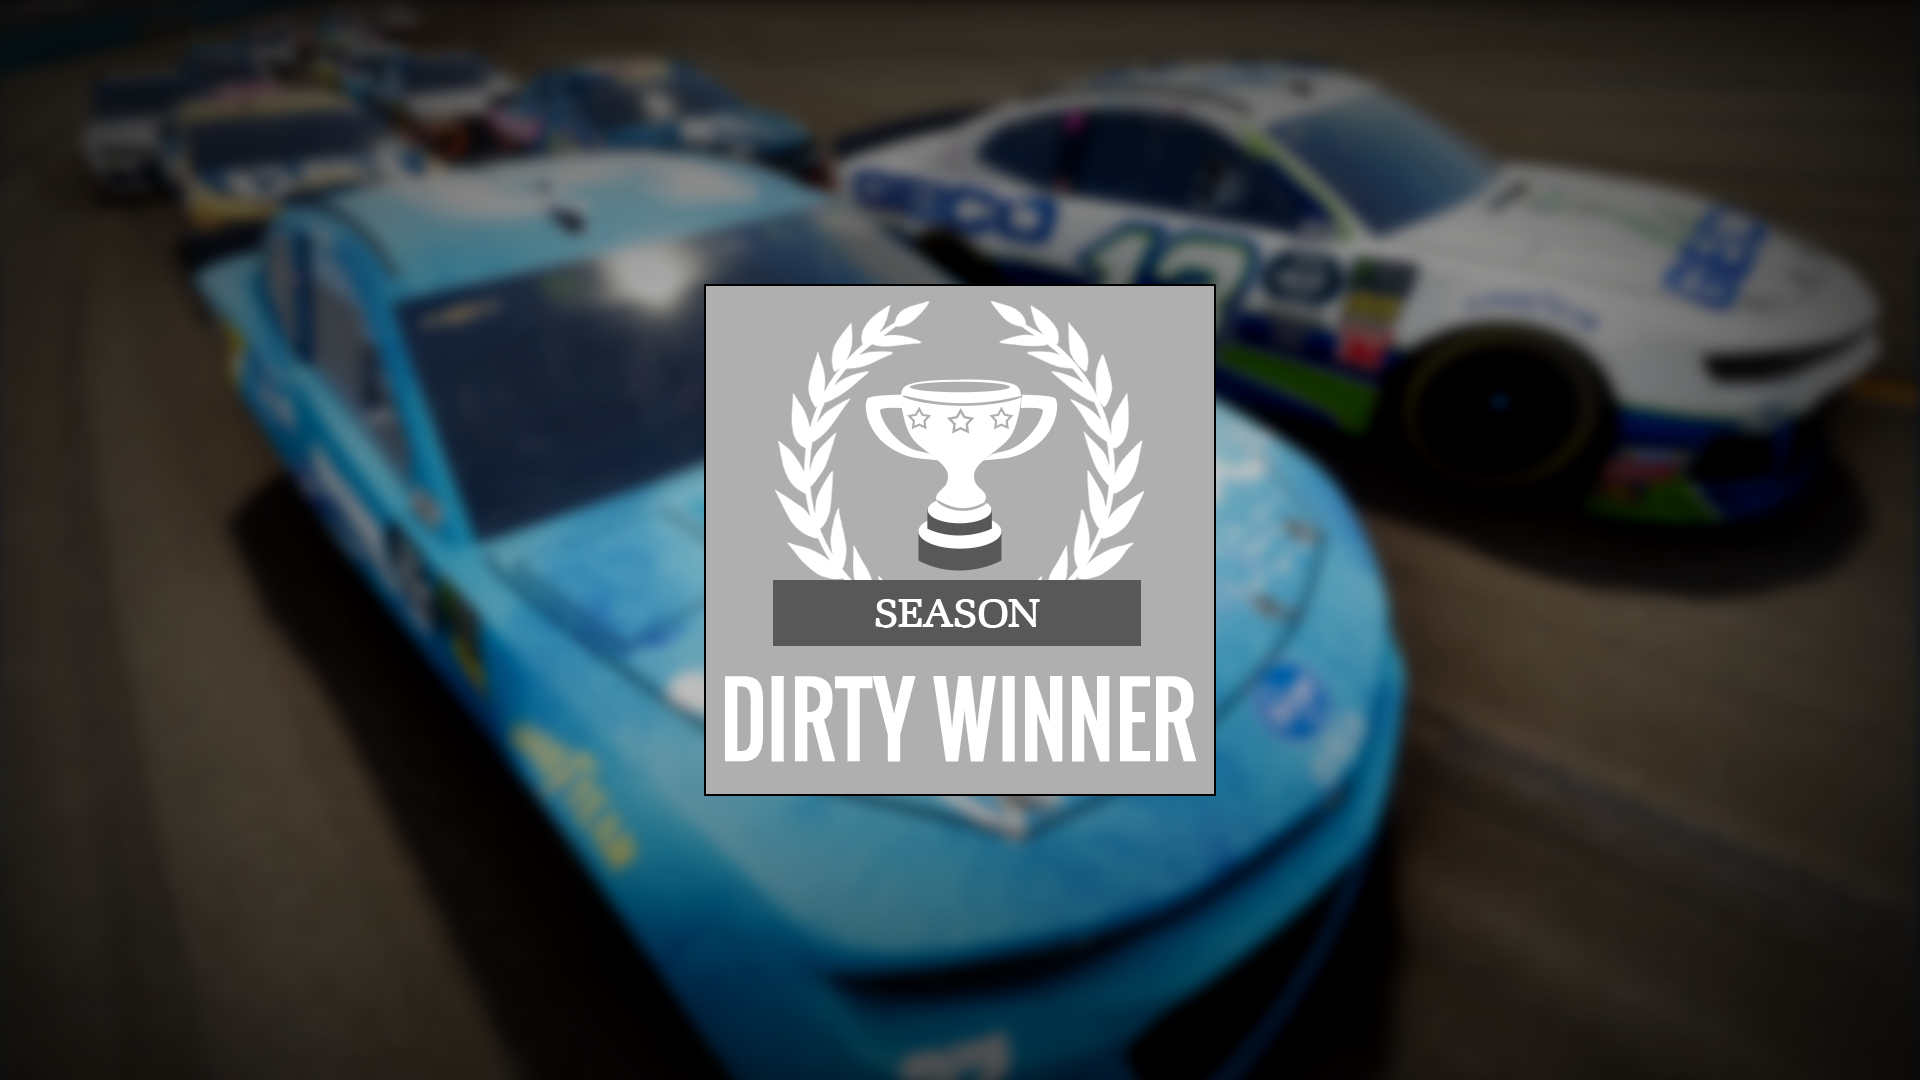 Icon for Dirty Winner